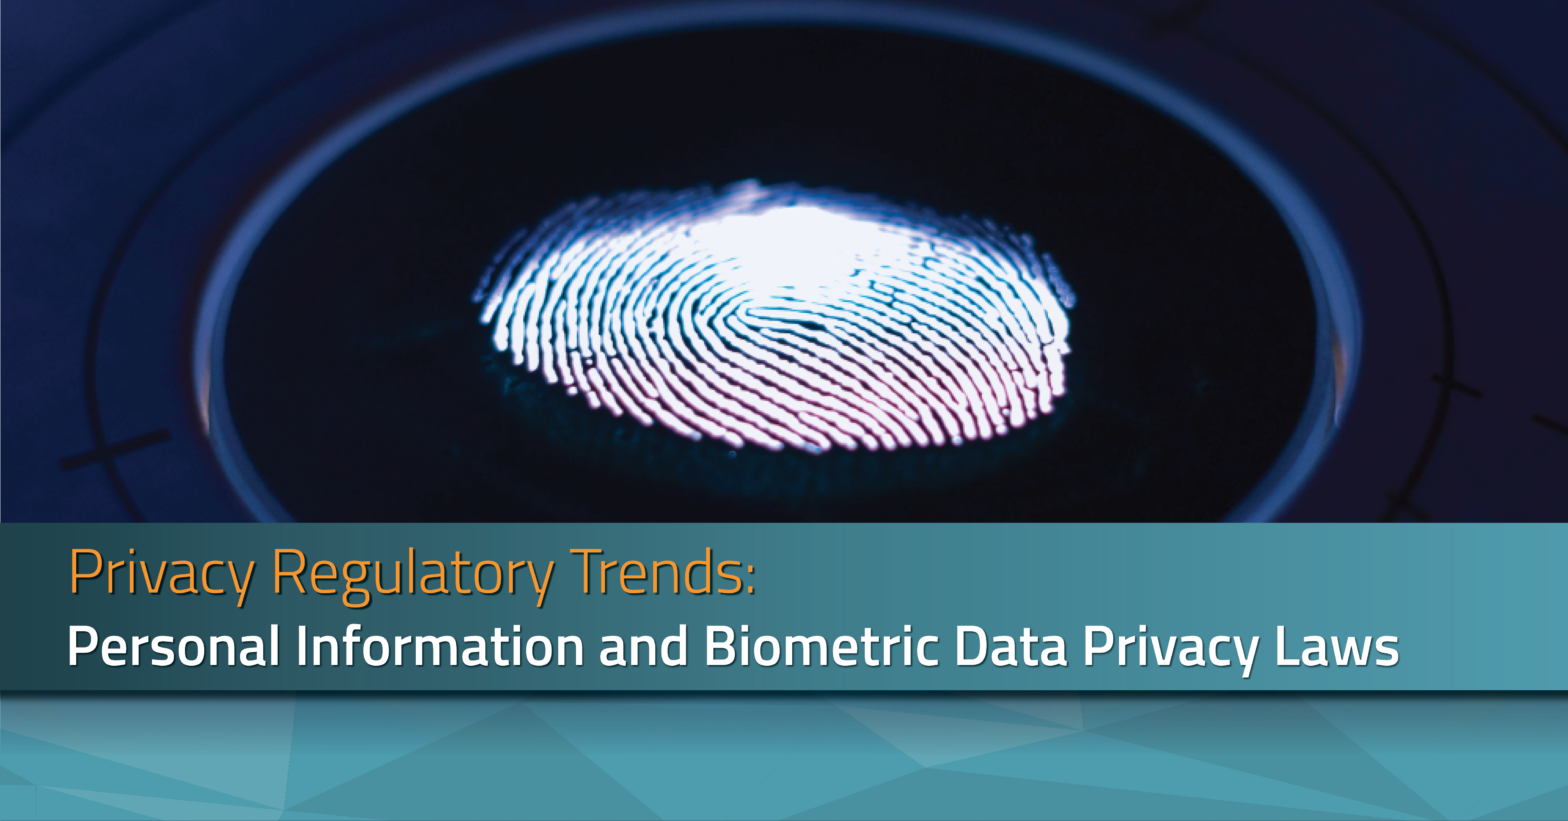 Privacy Regulatory Trends: Personal Information and Biometric Data Privacy Laws